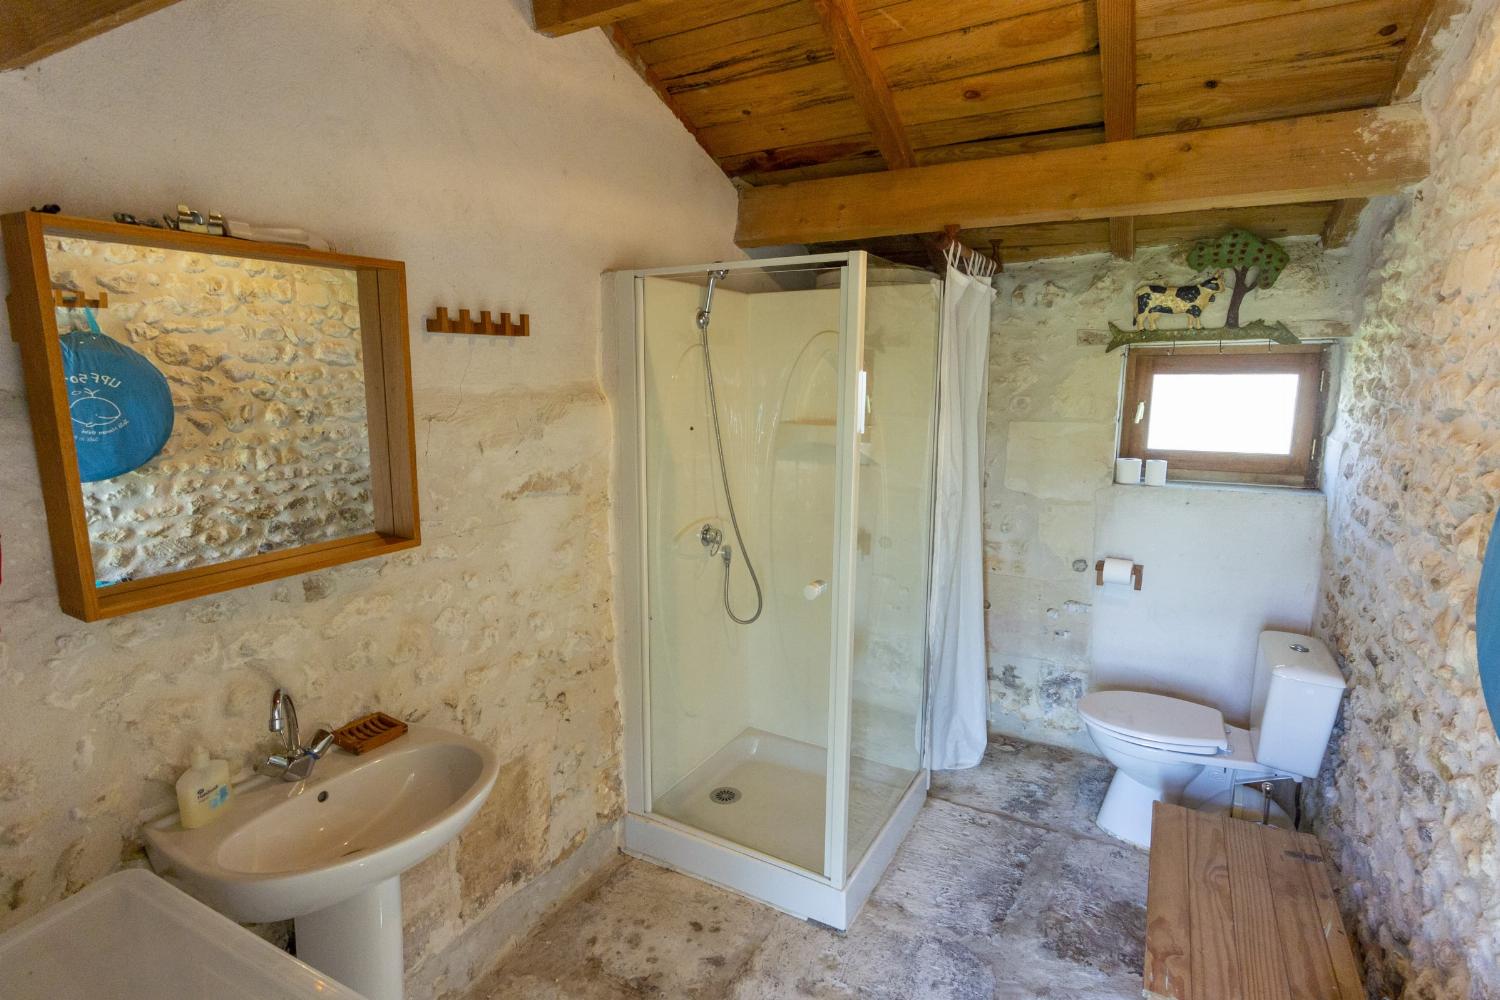 Bathroom | Vacation home in West France